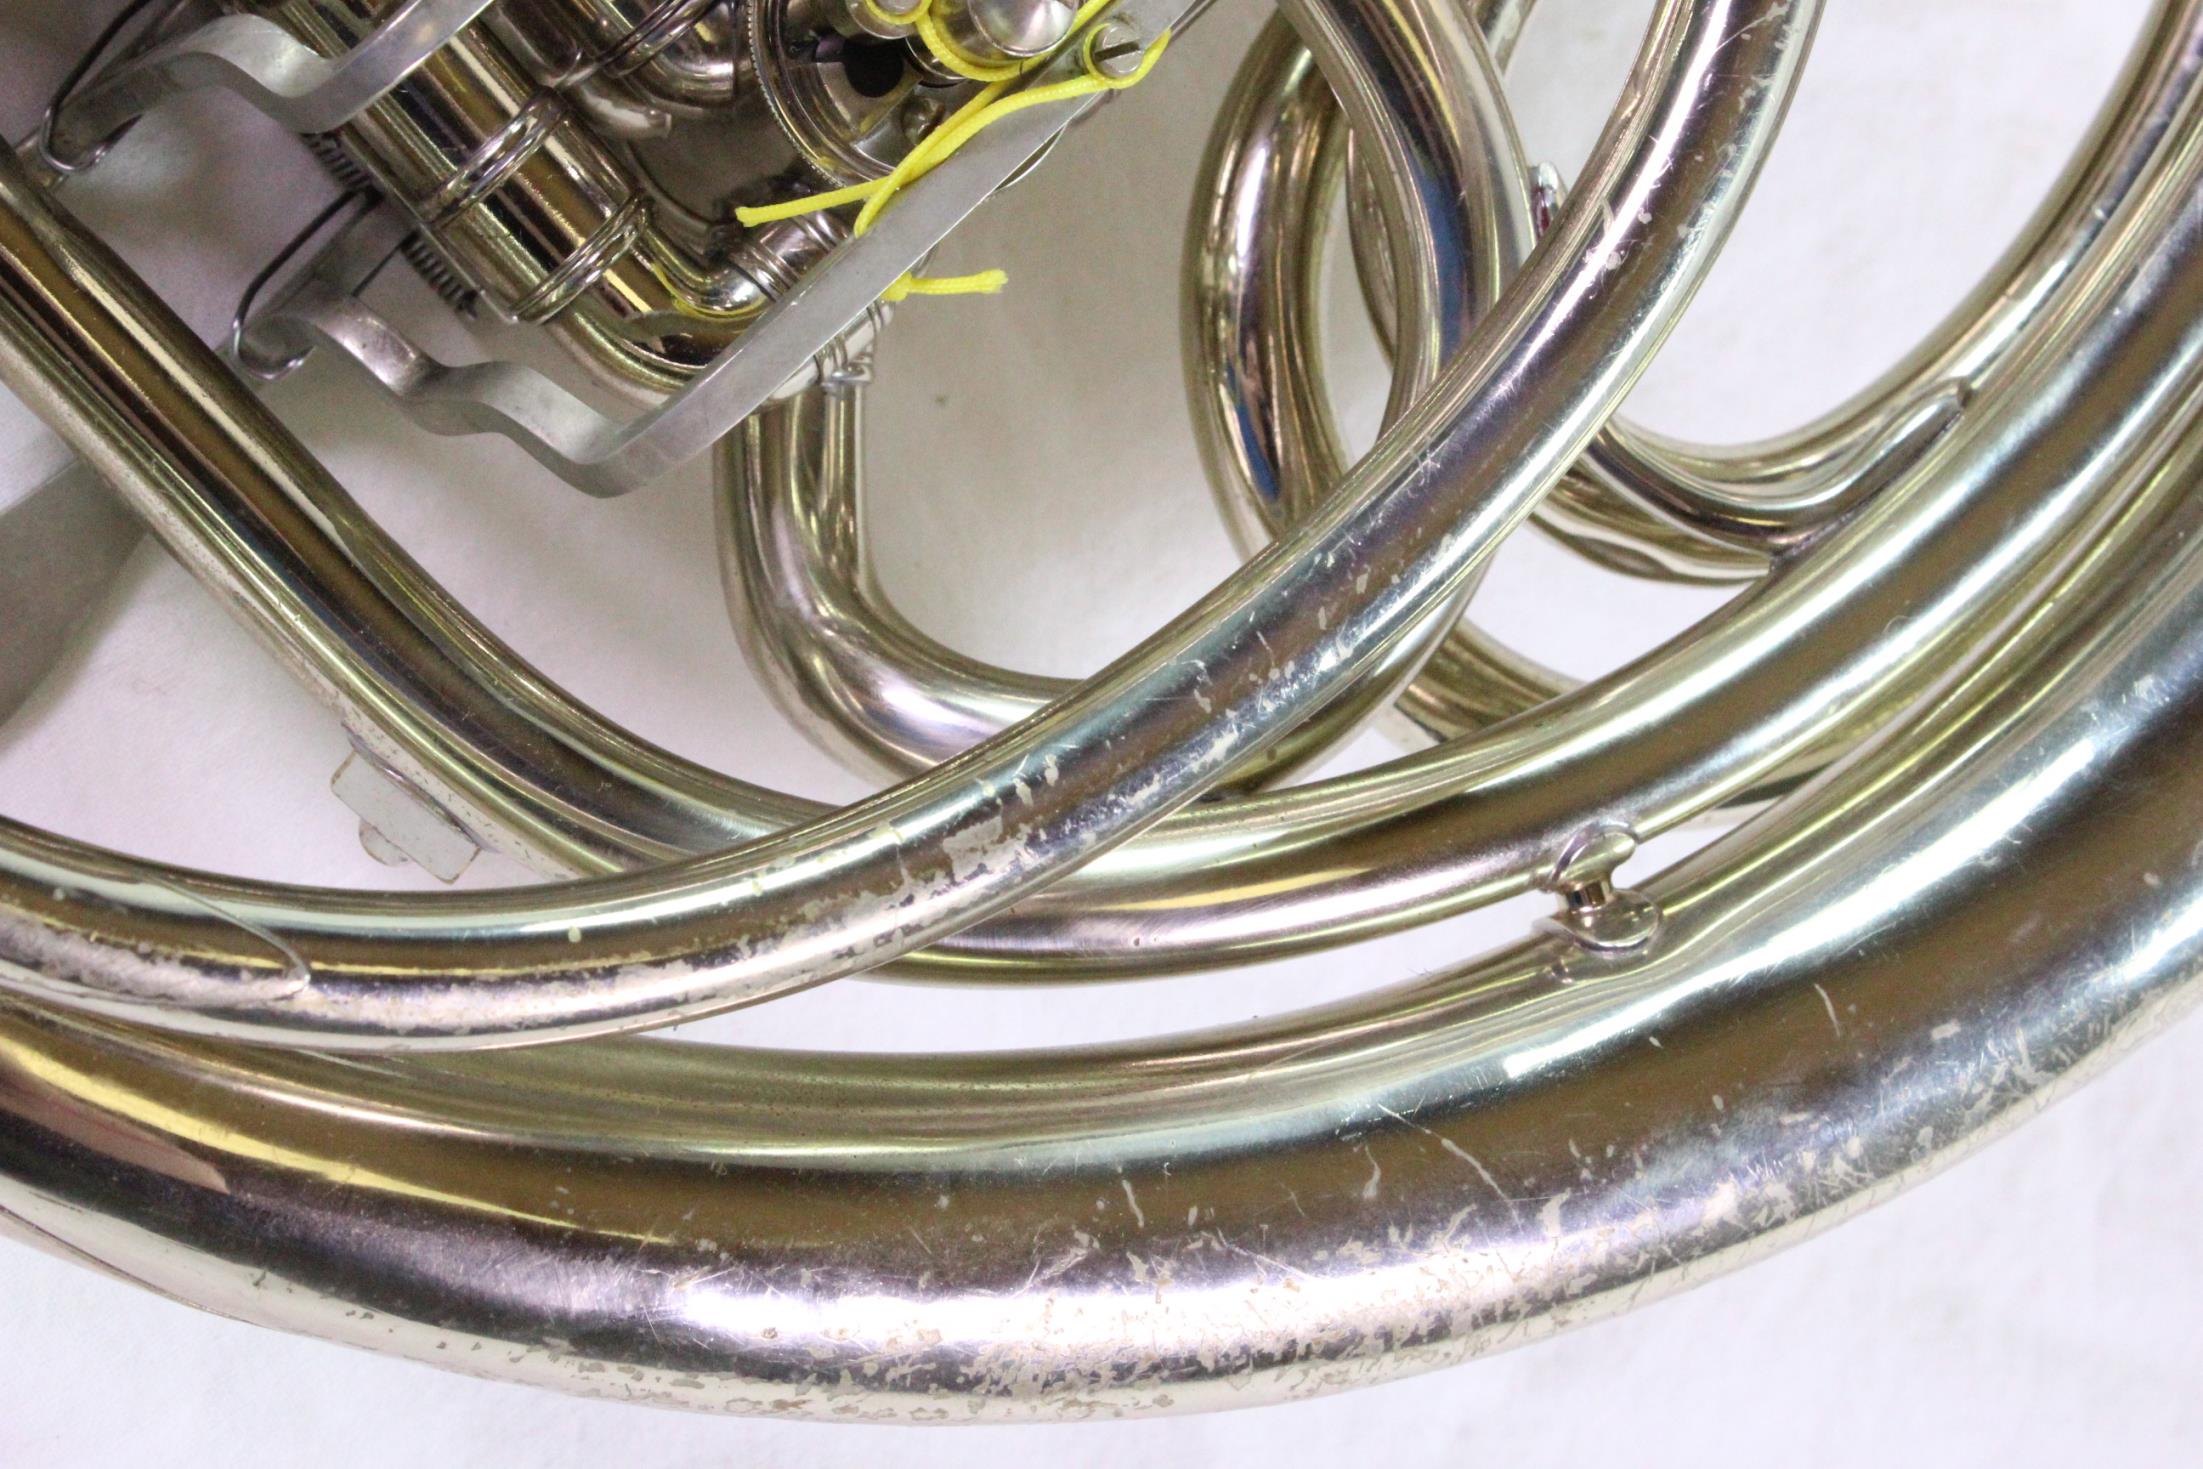 Conn French Horn Serial Number Location